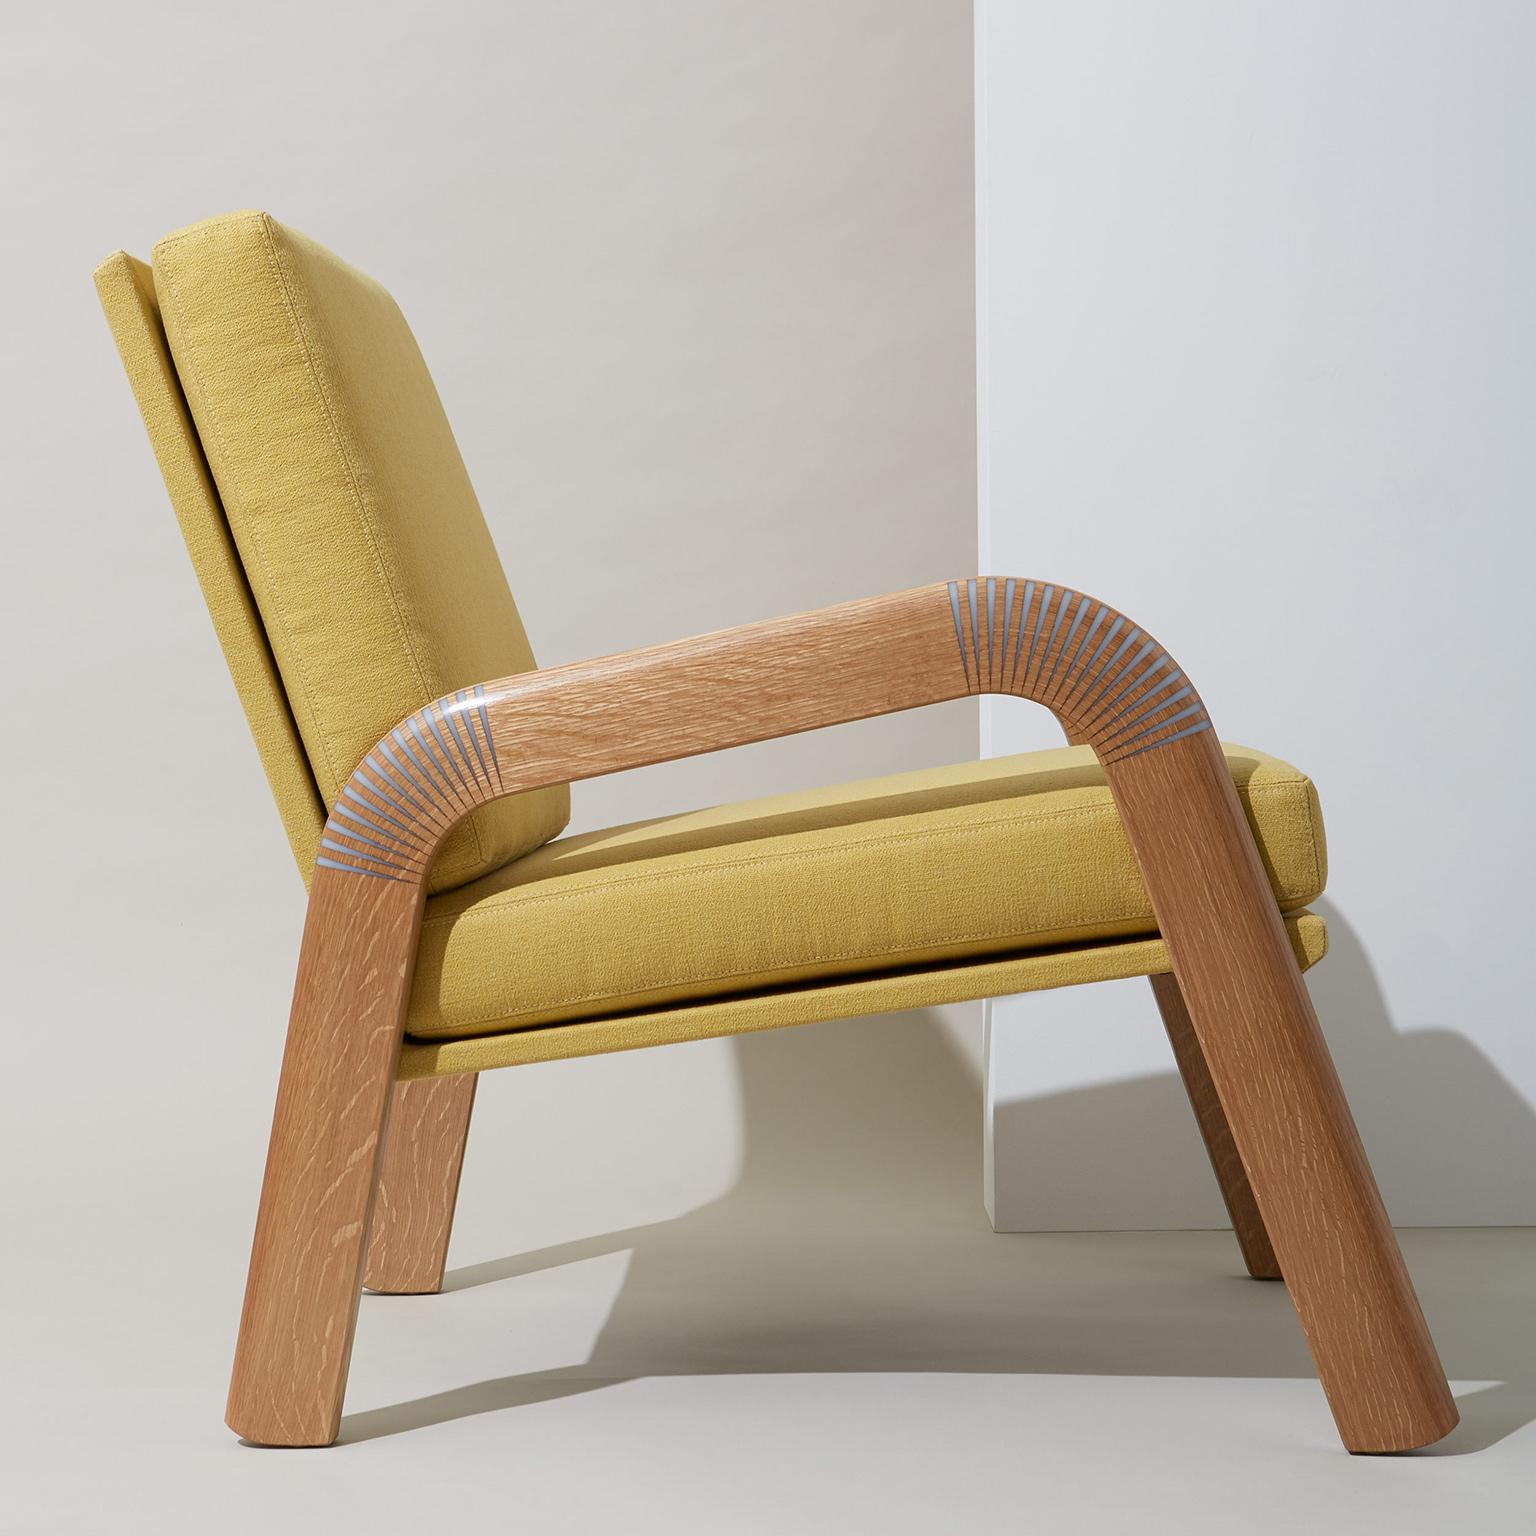 This item is made to order and customizable.

Kerf lounge chair by Noble Goods. Arms are made from quarter-sawn white oak that has been kerf-cut, bent, and inlaid with translucent white epoxy resin. Upholstered in Romo “Osumi” cotton in color